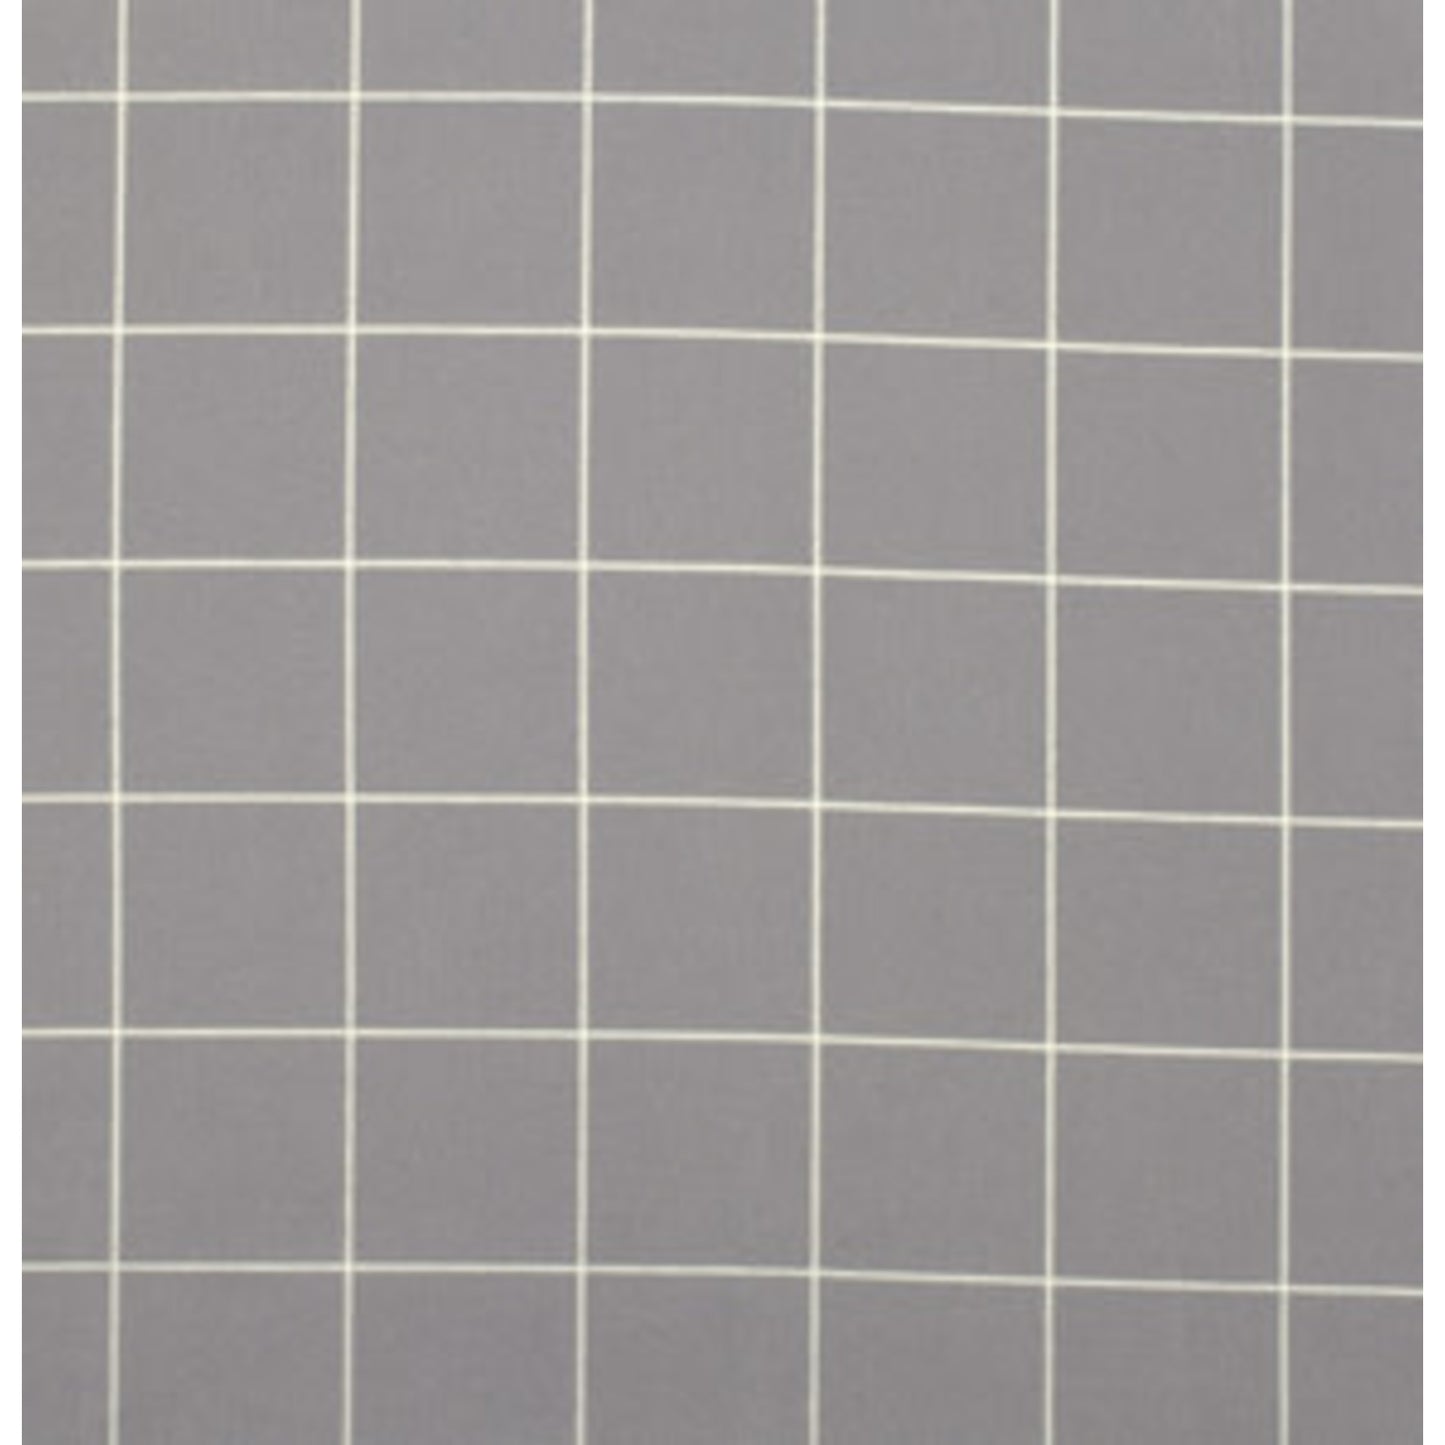 Design Wall Flannel Grid, Notions